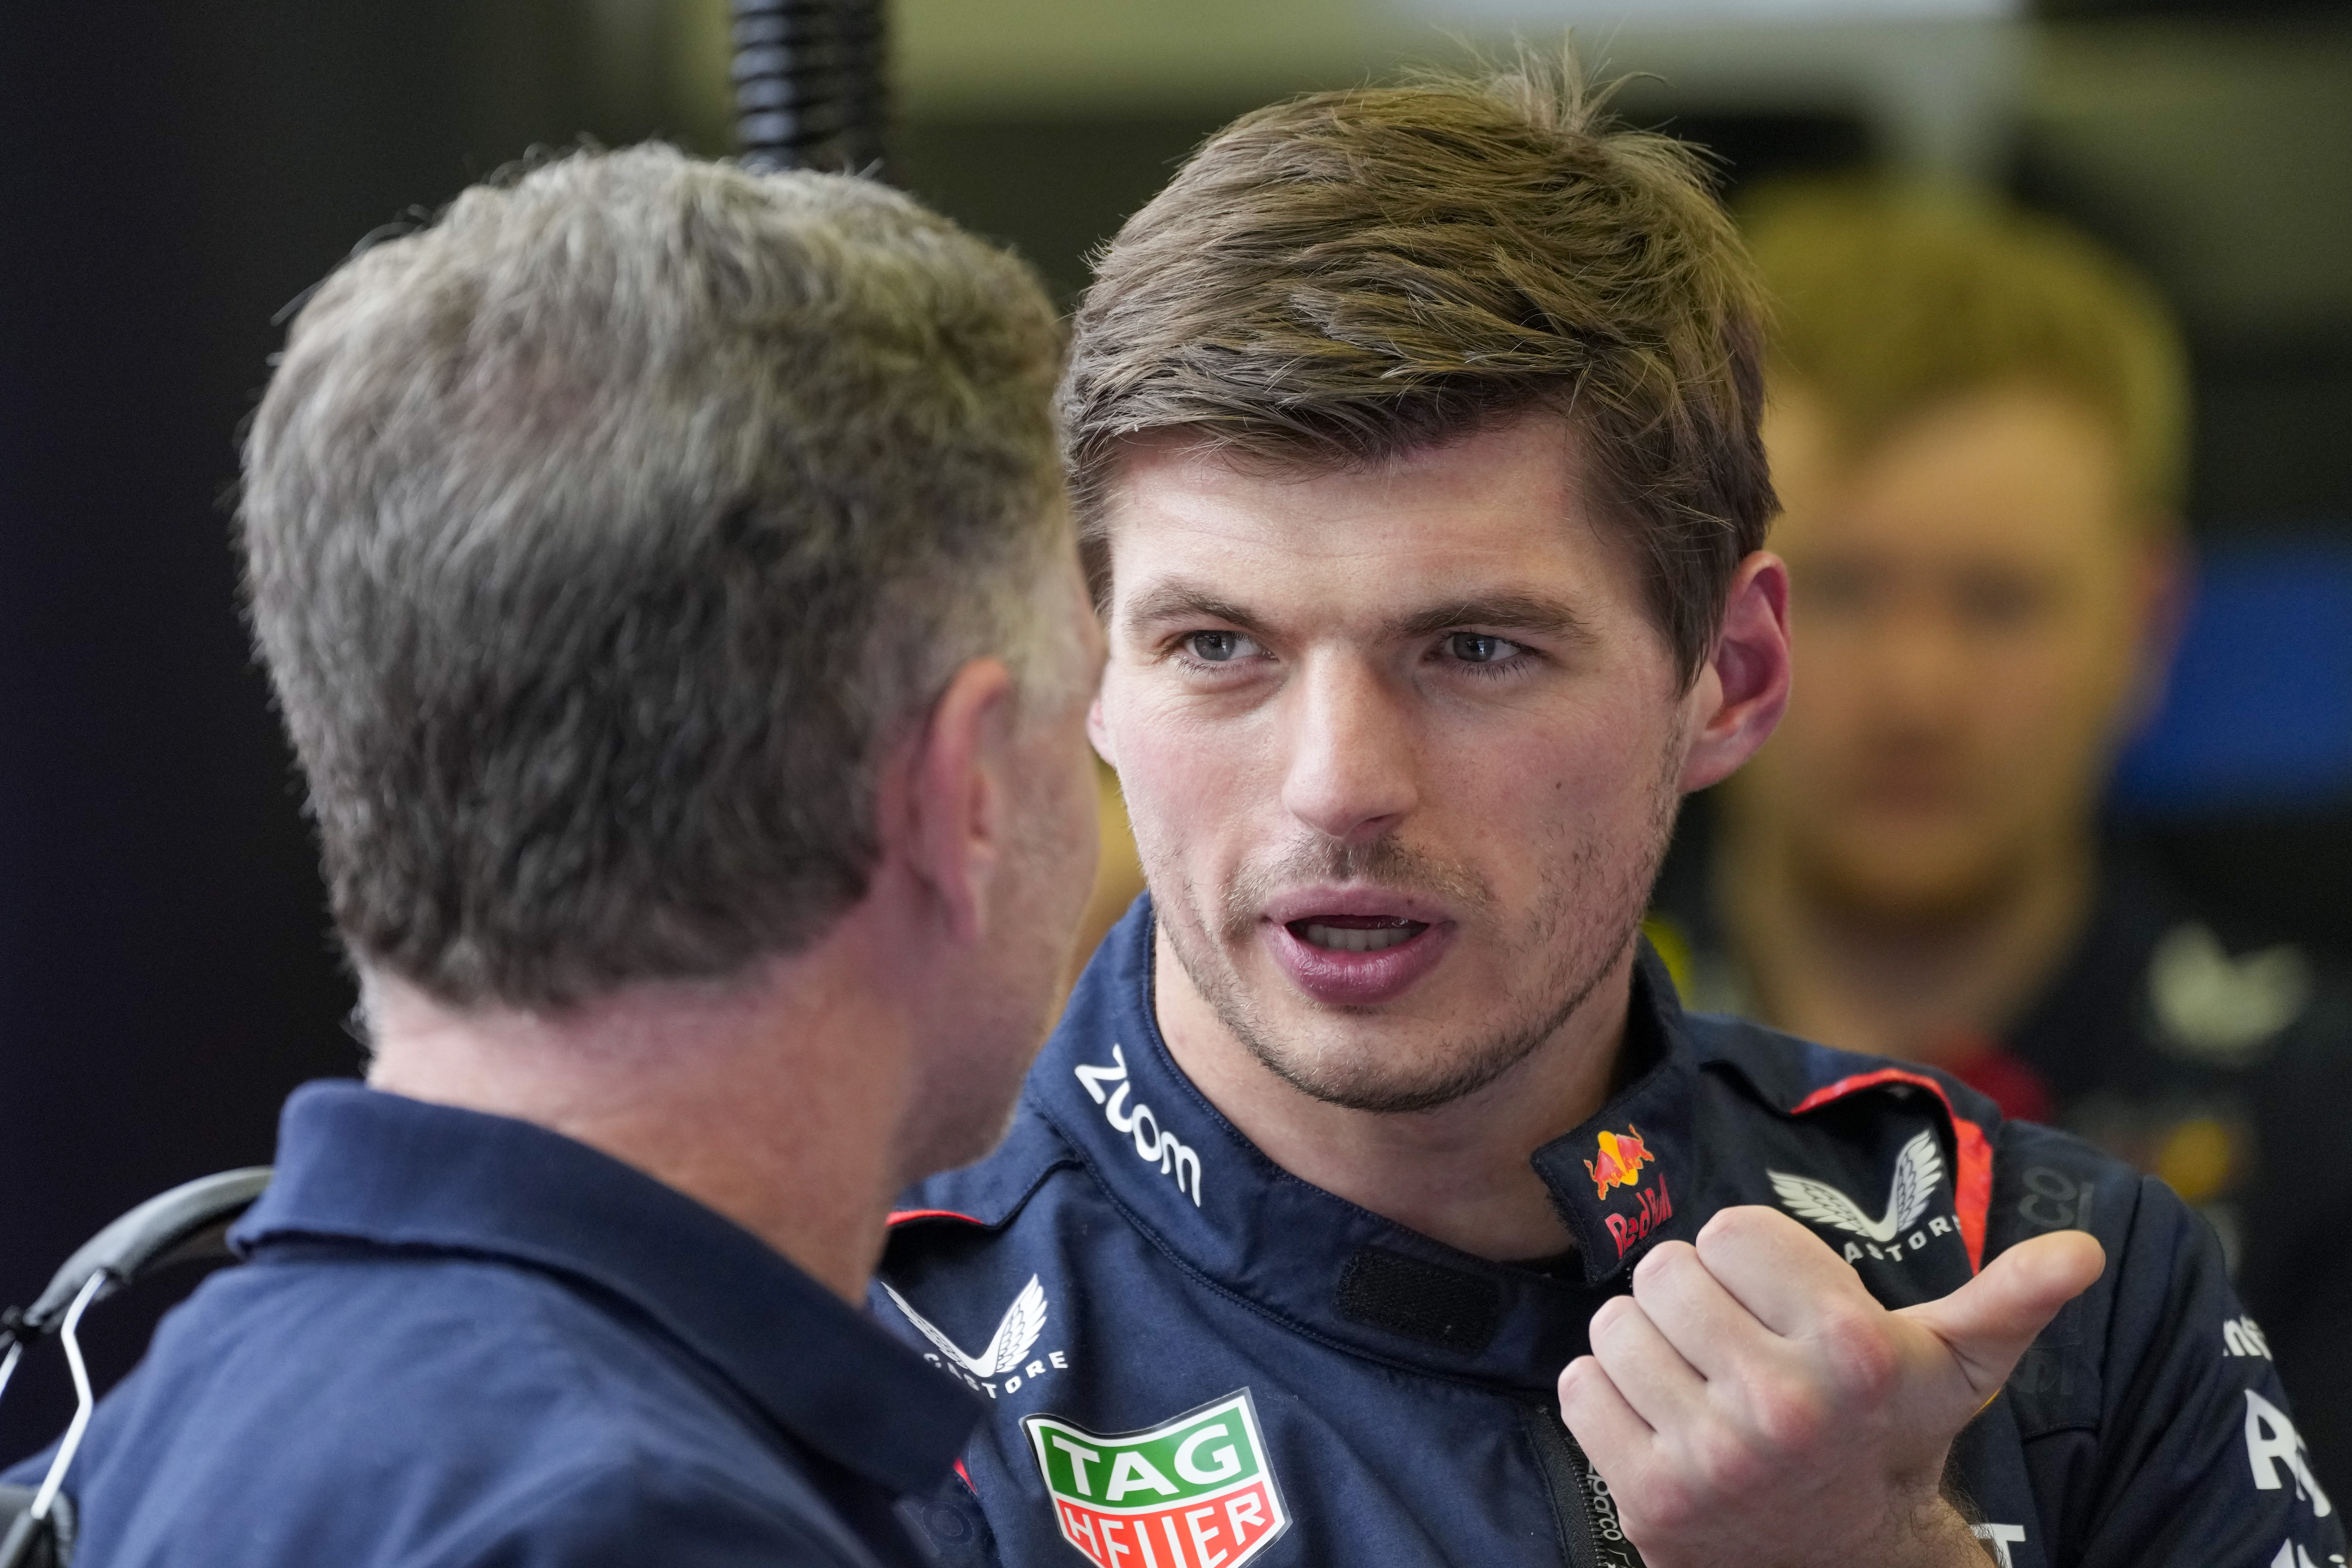 Jos Verstappen: Red Bull F1 team will “explode” if Christian Horner stays  as team principal, Auto Racing